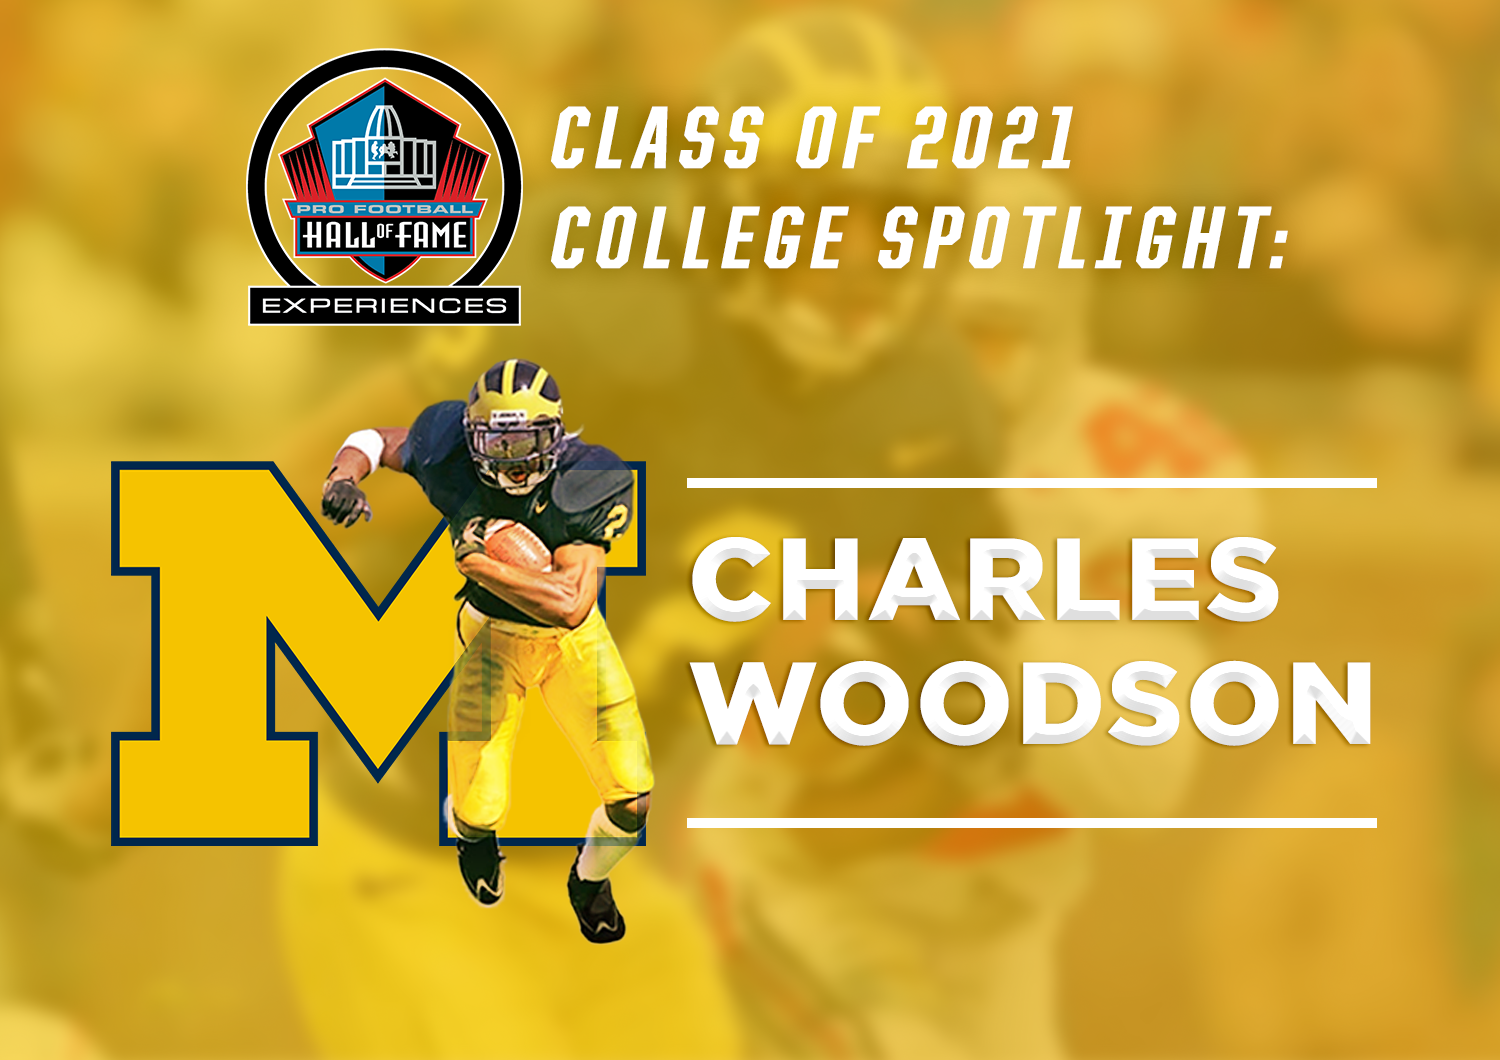 Class of 2021 College Spotlight: Charles Woodson at Michigan